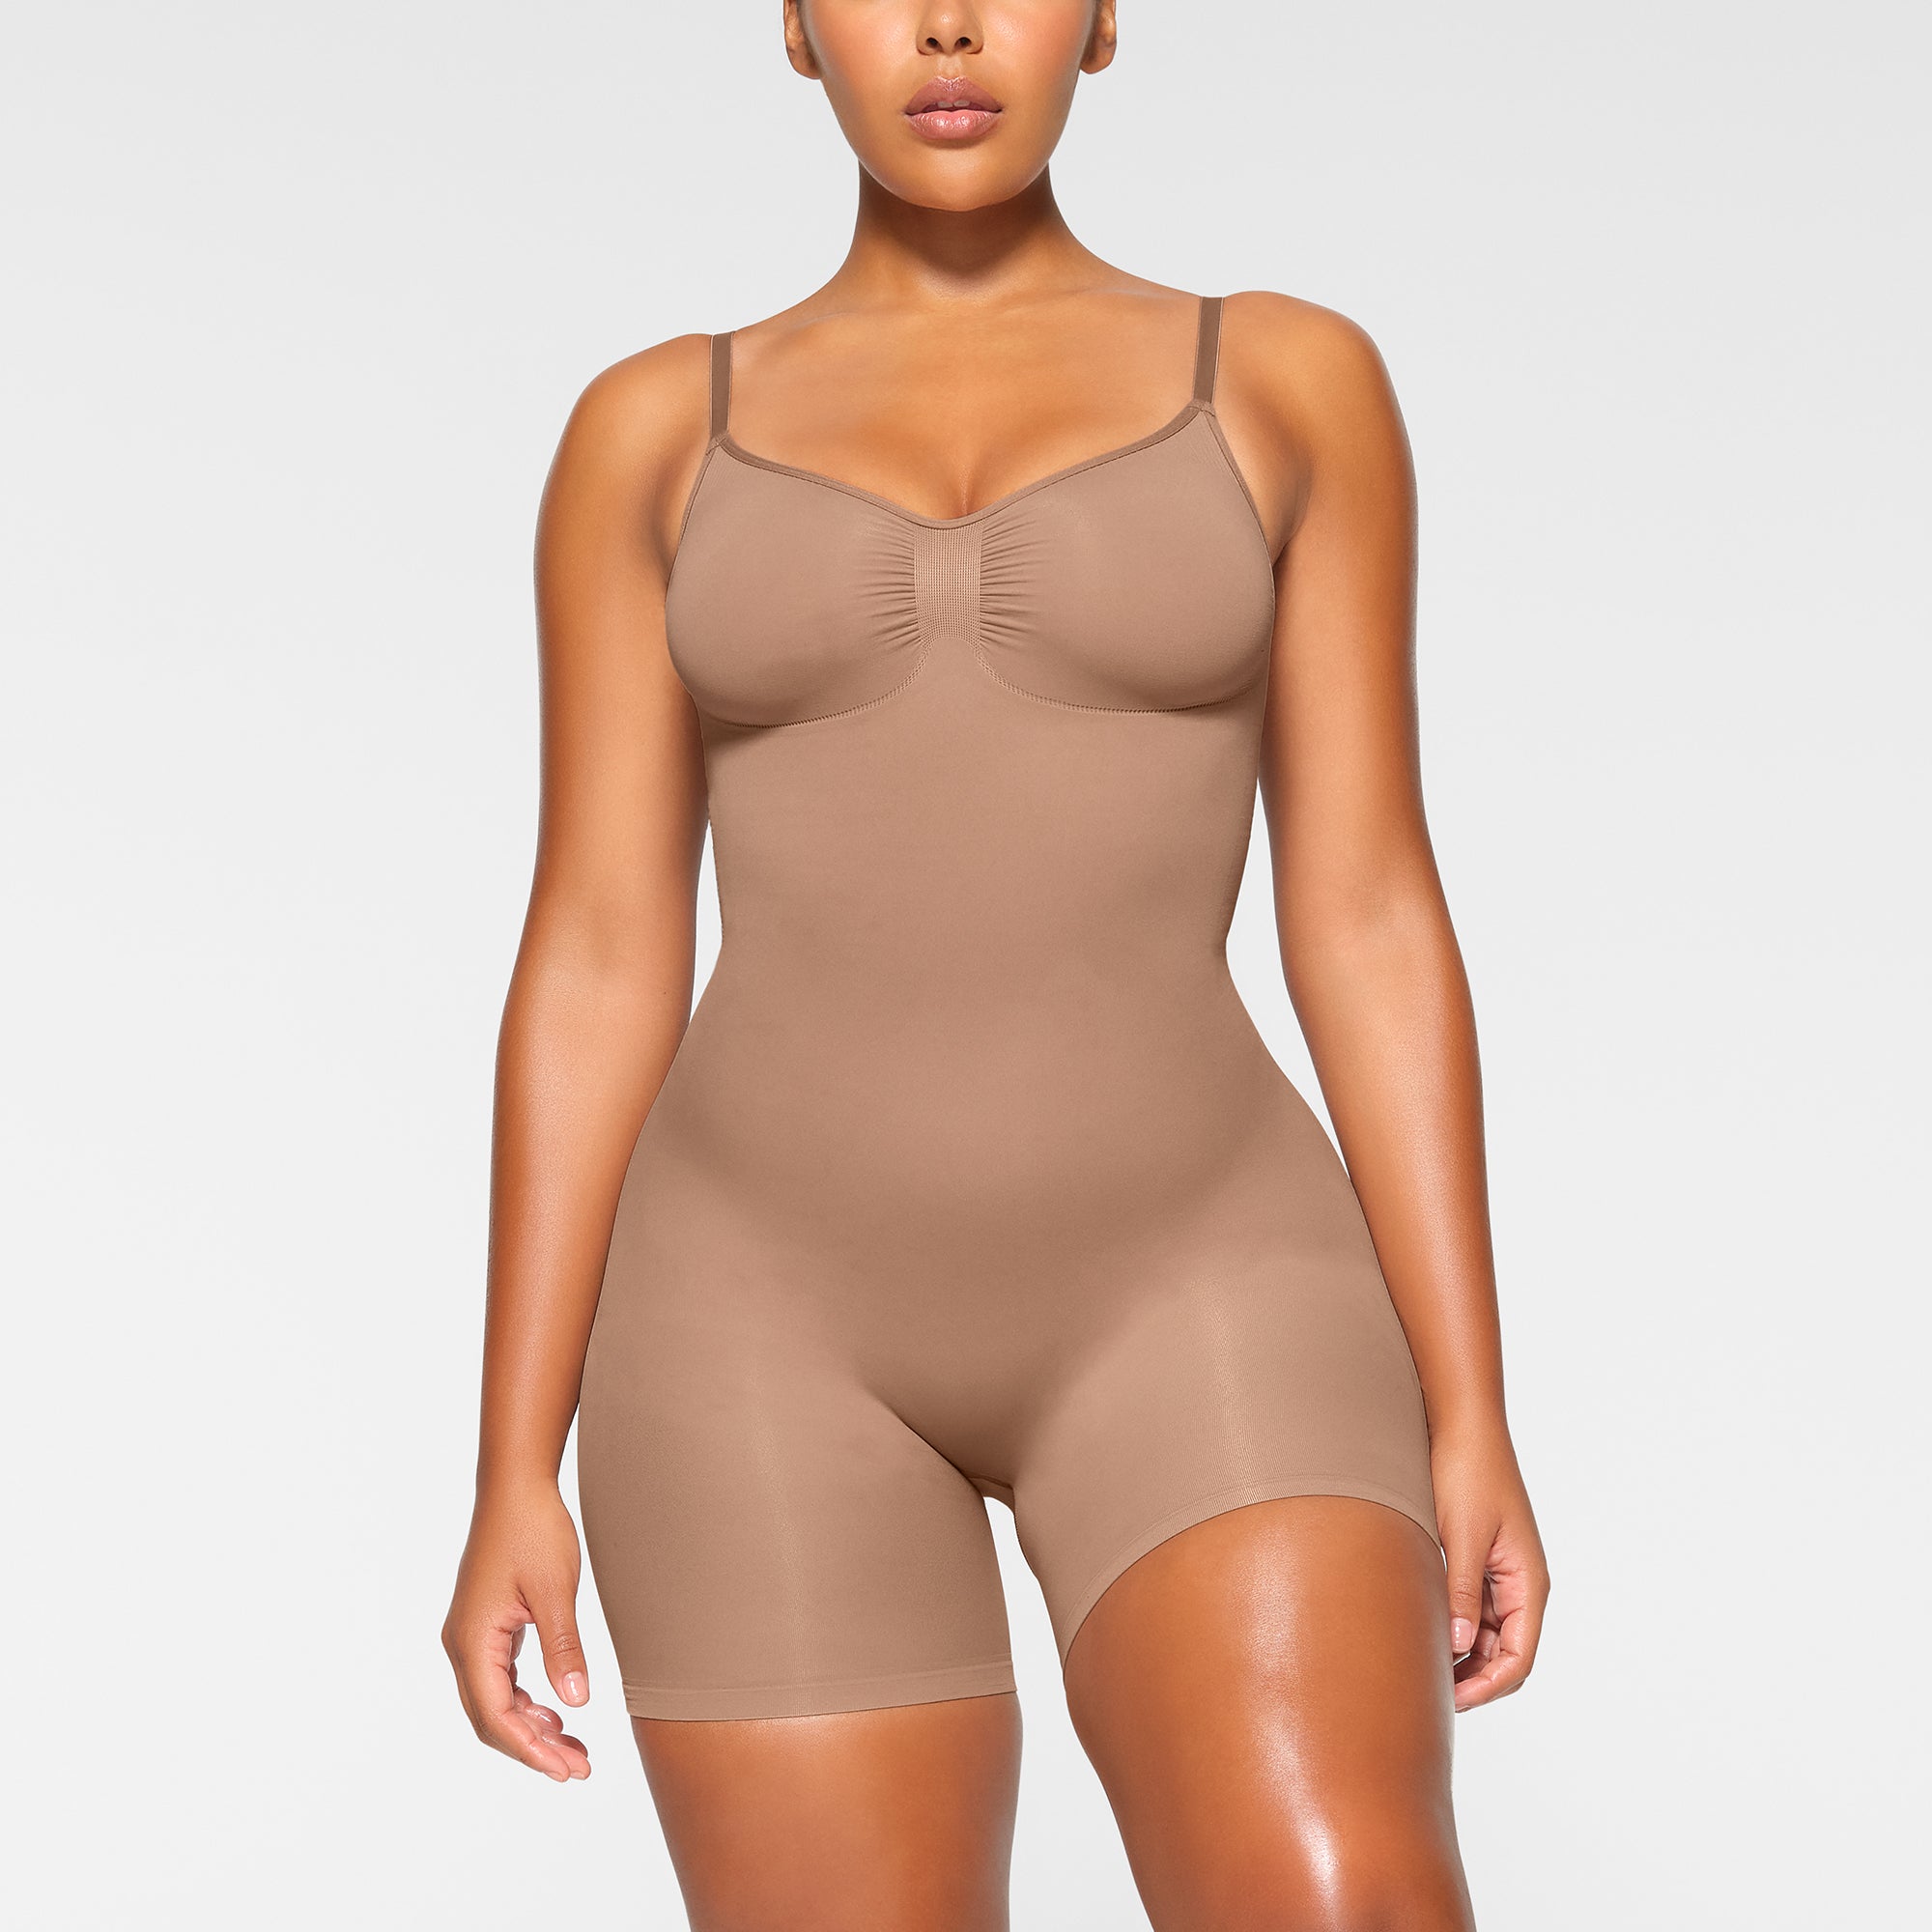 Body Beautiful Bodysuit Shapers and Slip